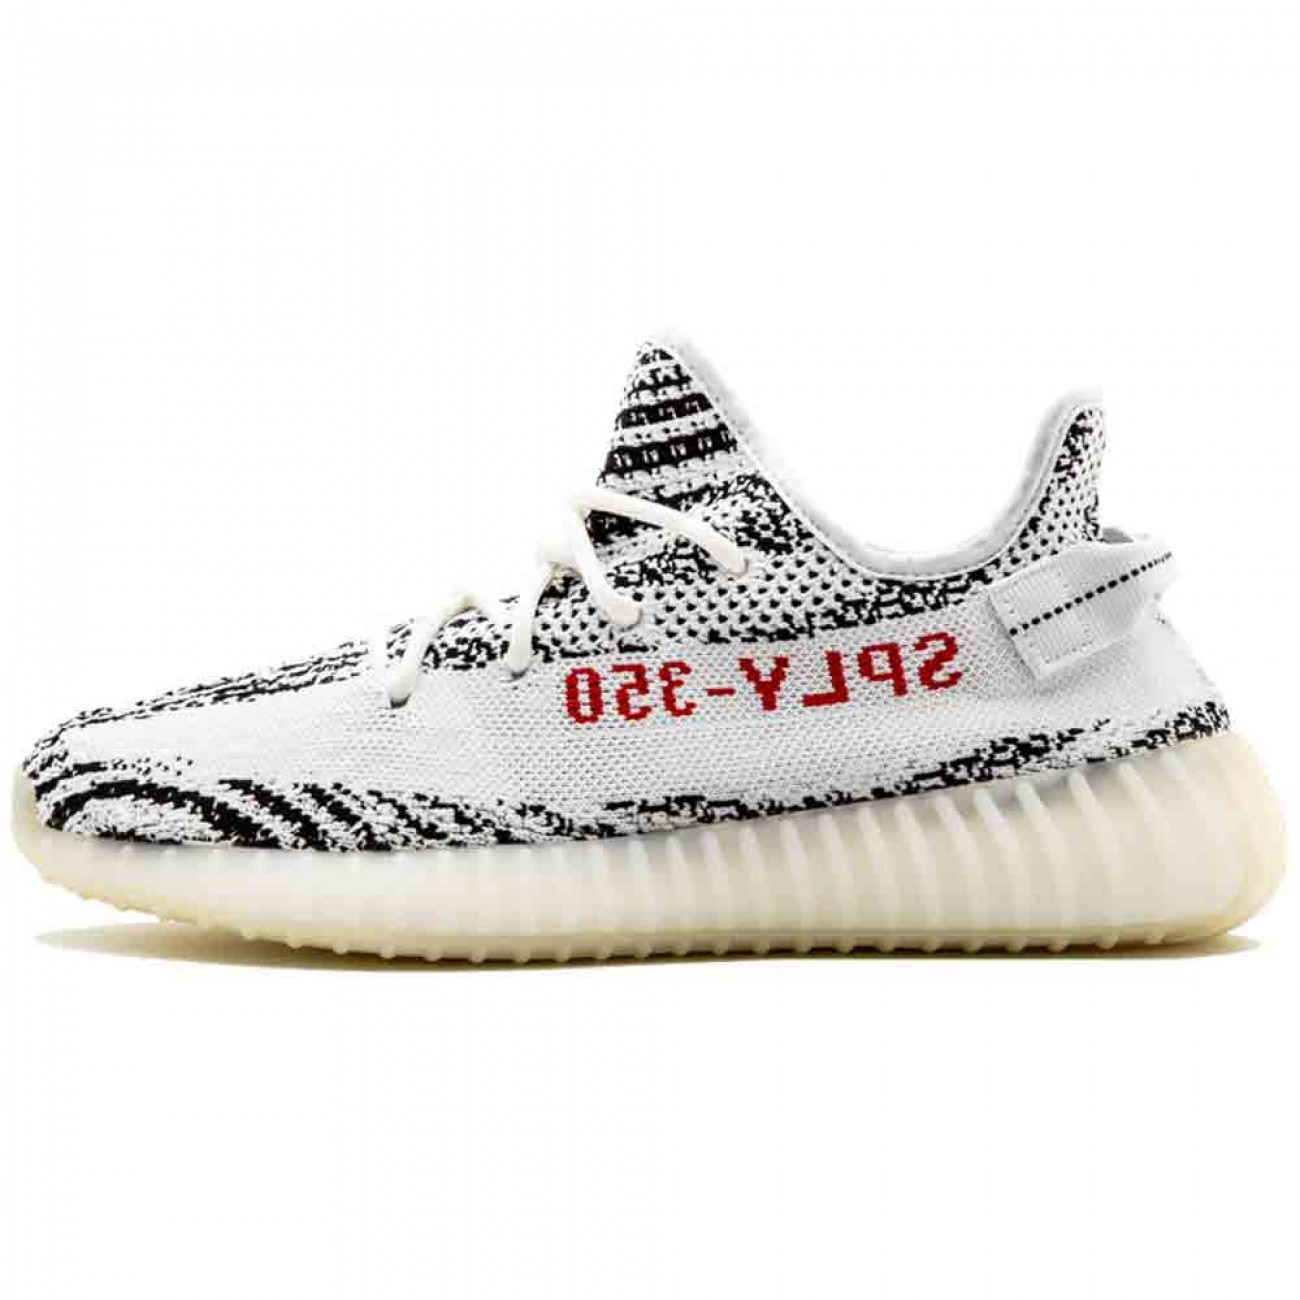 Adidas Yeezy Boost 350 V2 Zebra Cp9654 Outfit 2018 Release Date (1) - newkick.org